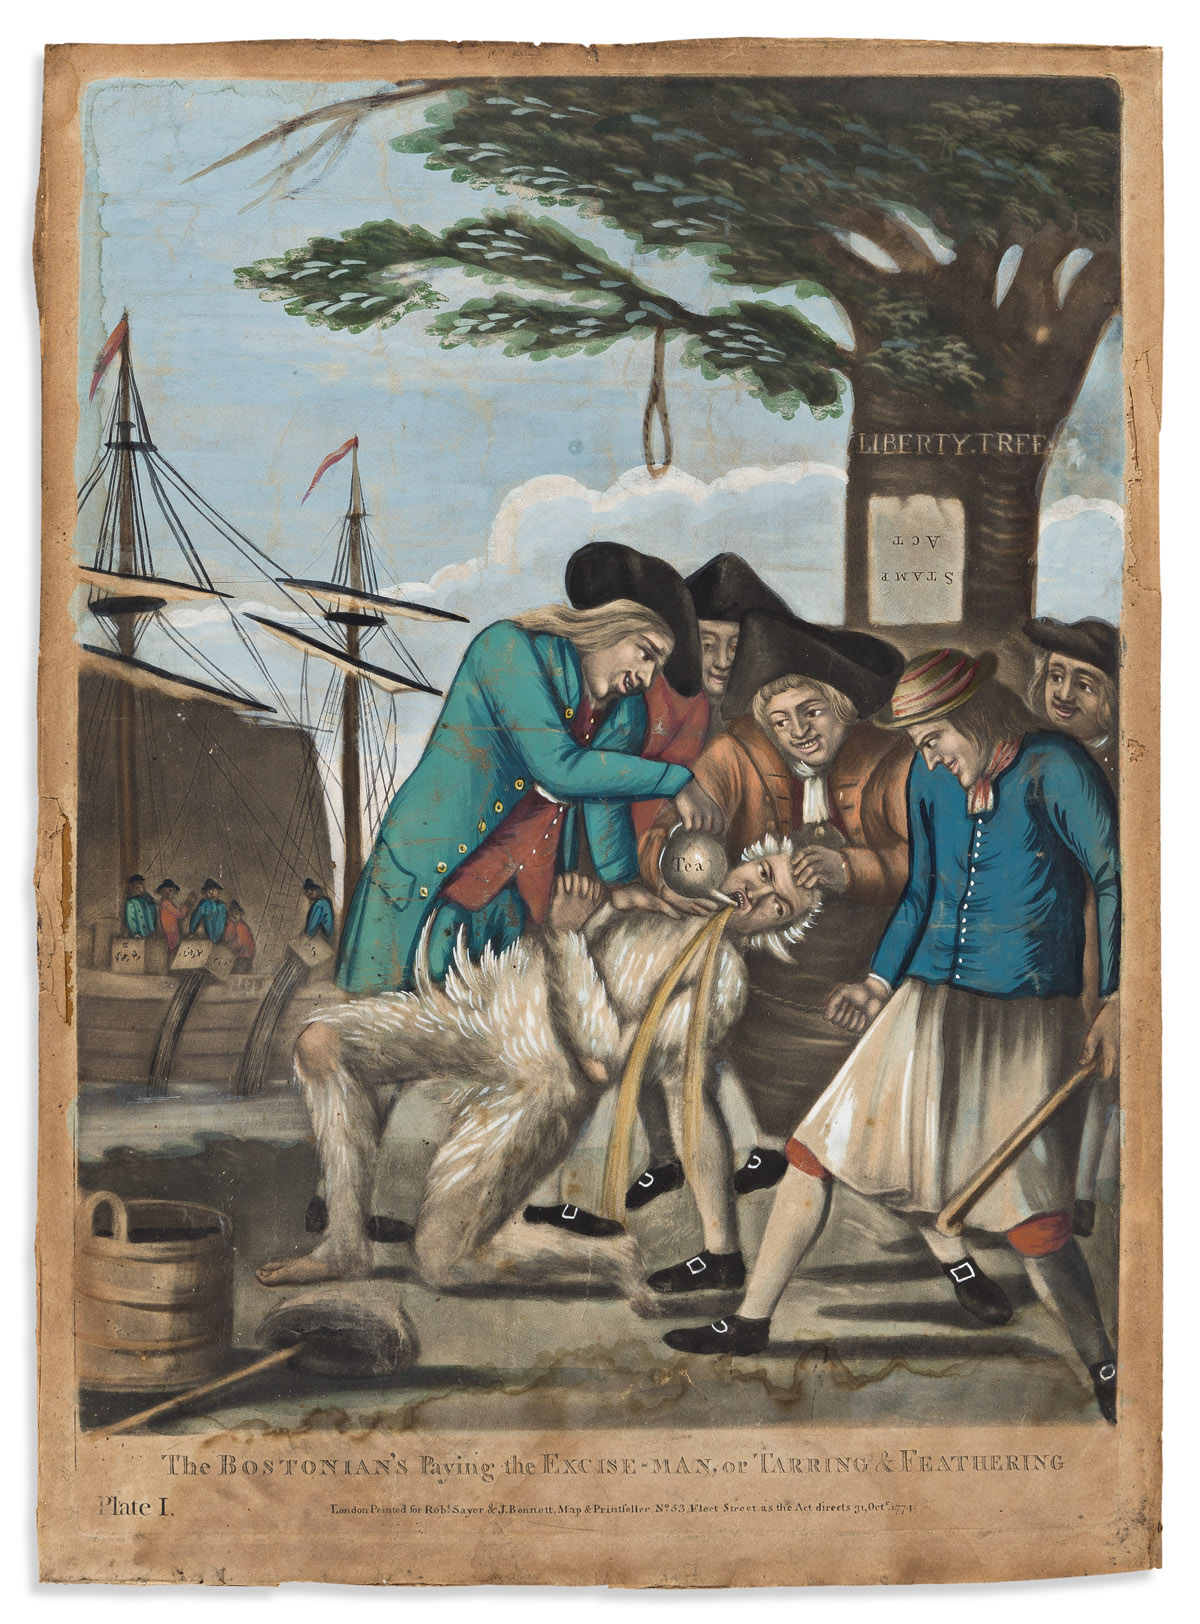 (AMERICAN REVOLUTION--PRELUDE.) [Philip Dawe, artist.] Bostonians Paying the Excise Man, or Tarring & Feathering.